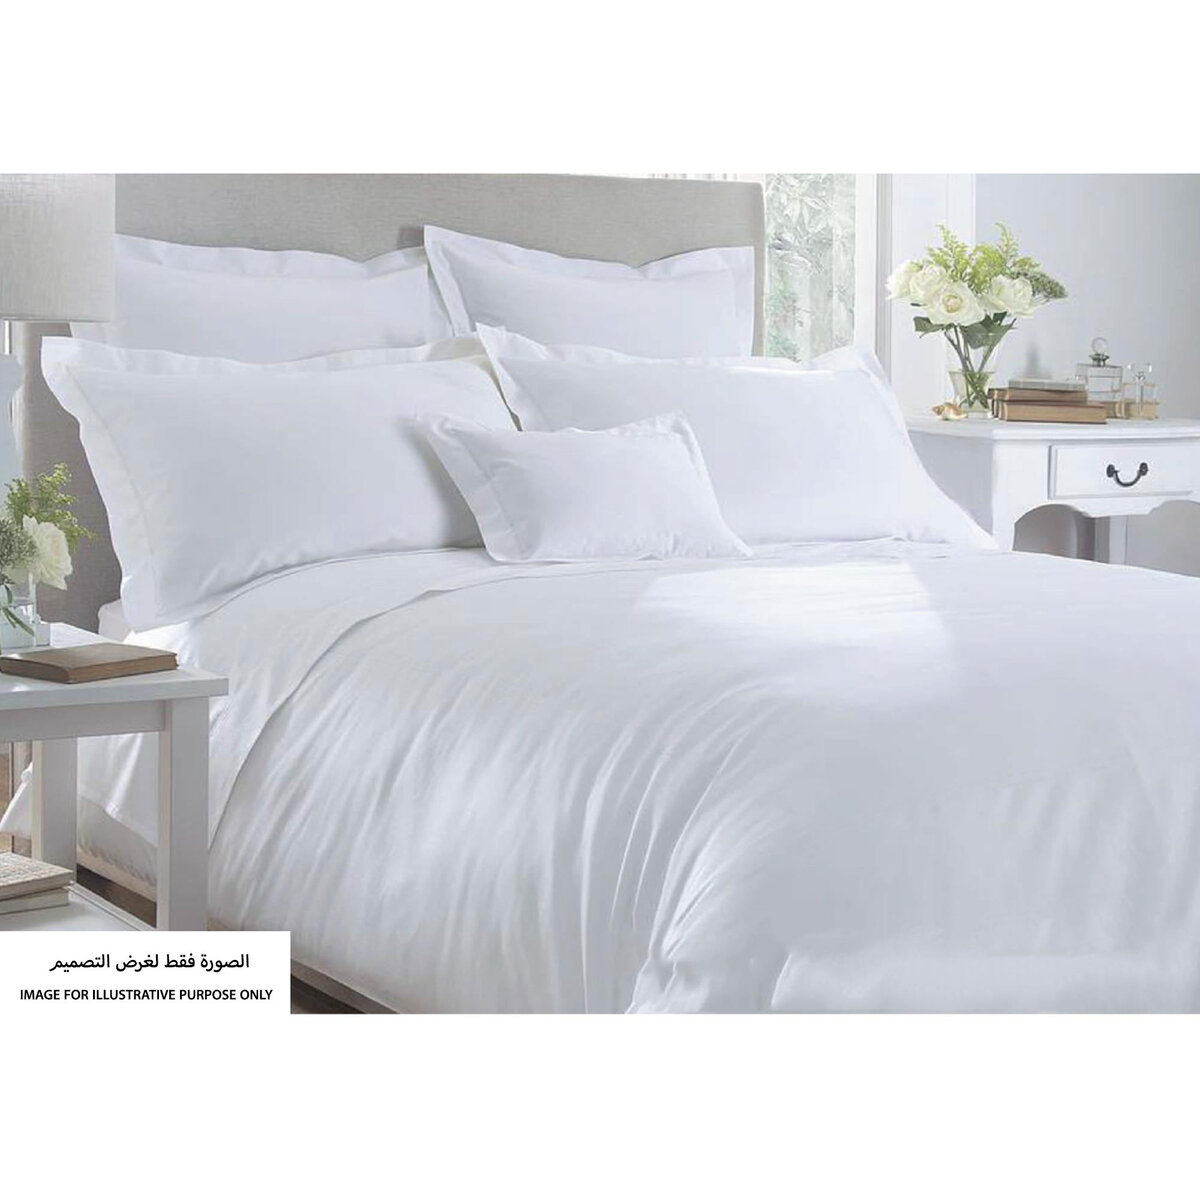 Homewell Fitted Sheet Single 2pc Set White